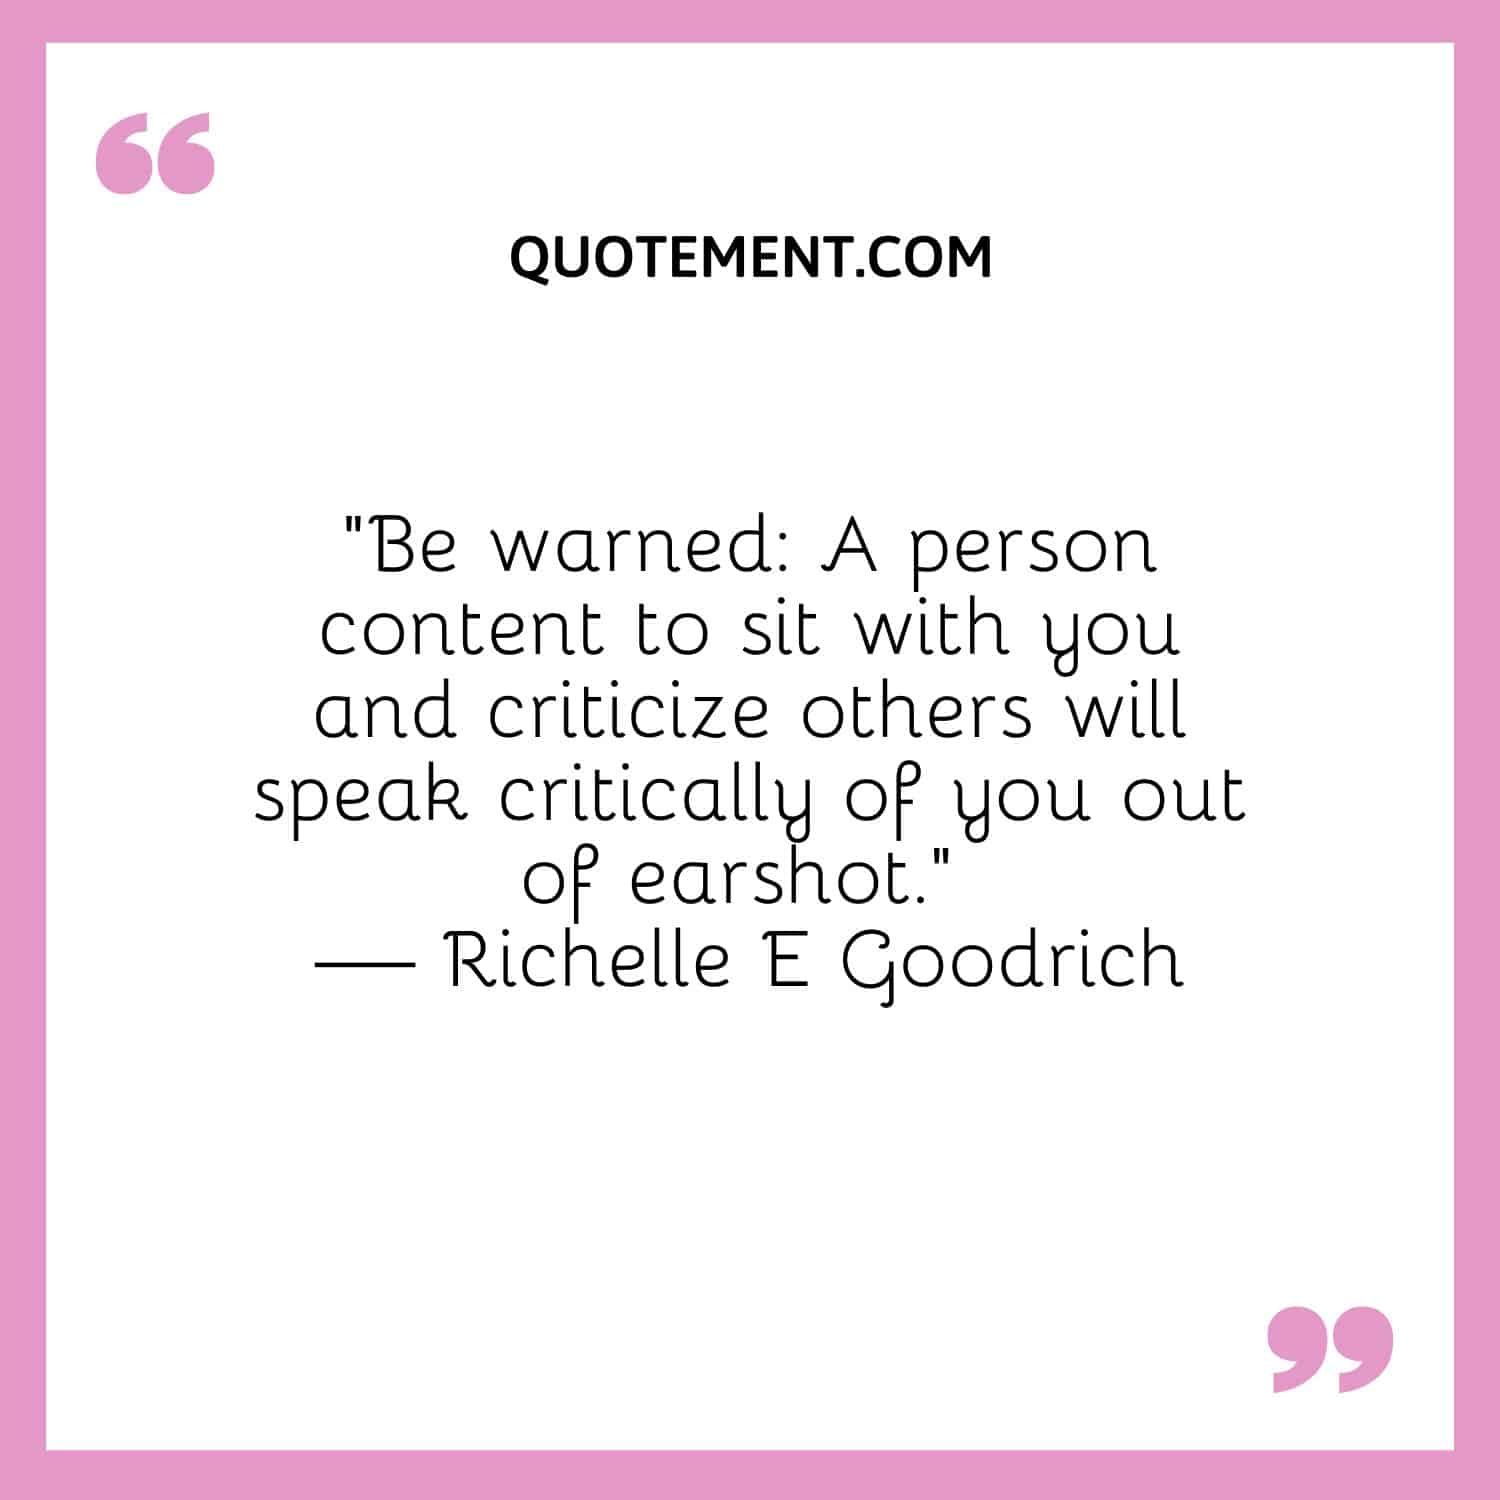 “Be warned A person content to sit with you and criticize others will speak critically of you out of earshot.” — Richelle E Goodrich